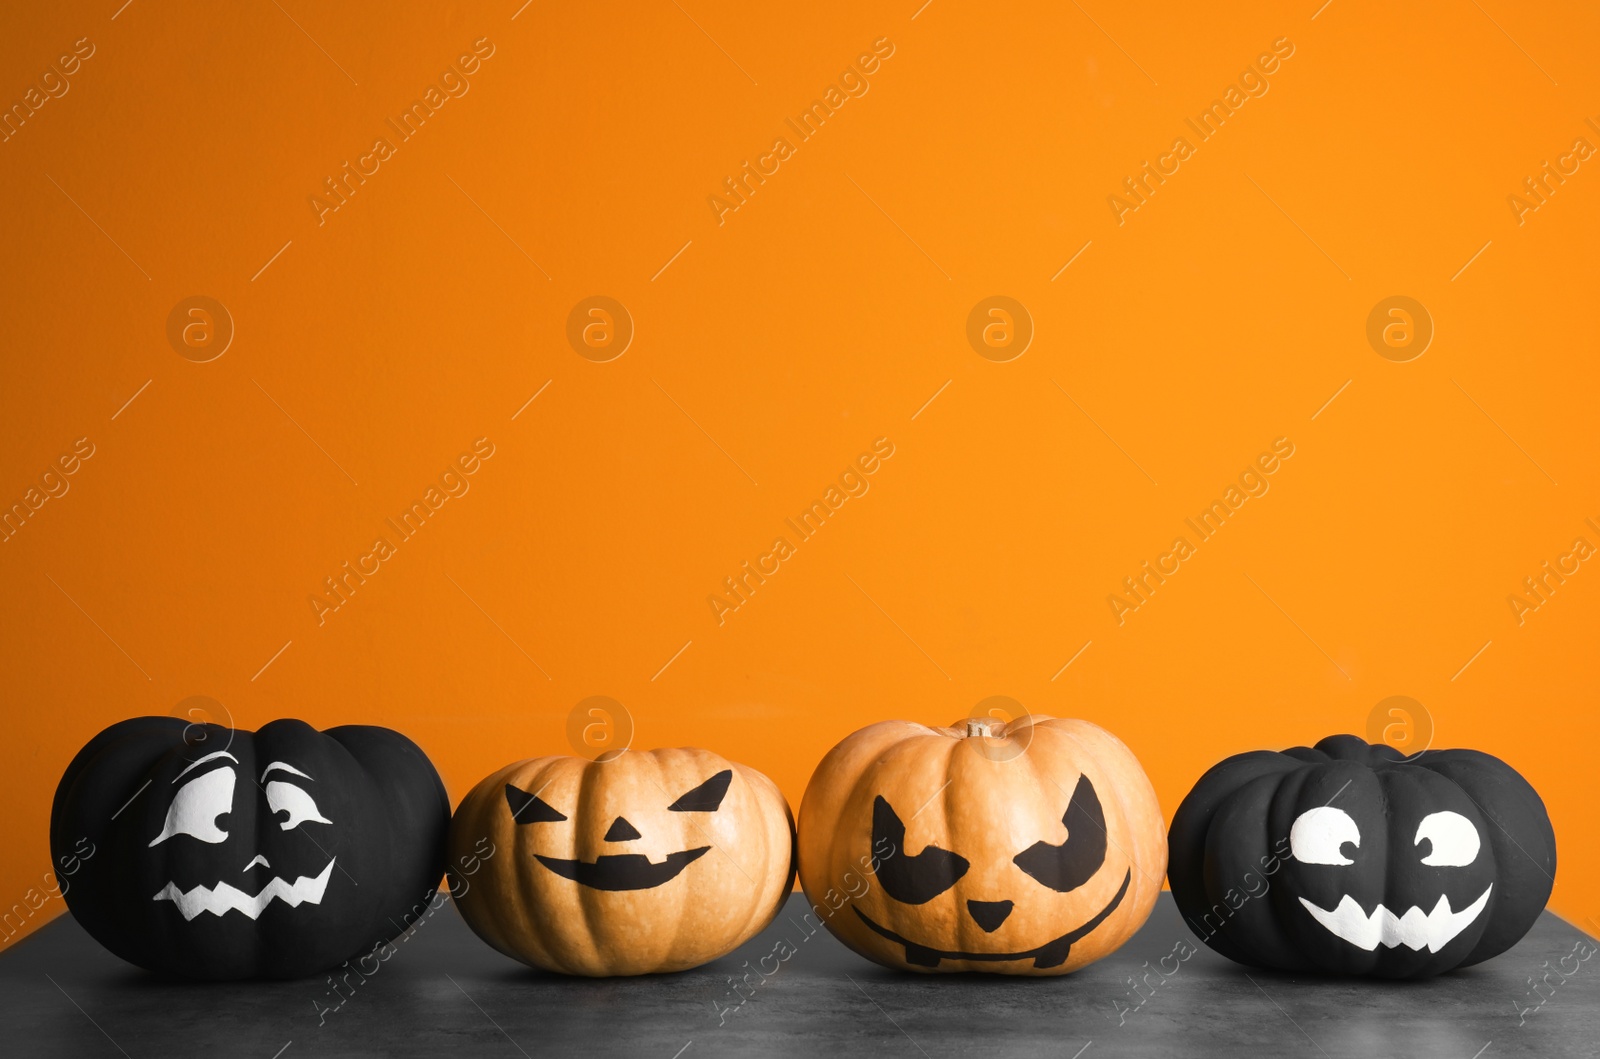 Photo of Pumpkins with scary faces on table against color background, space for text. Halloween decor